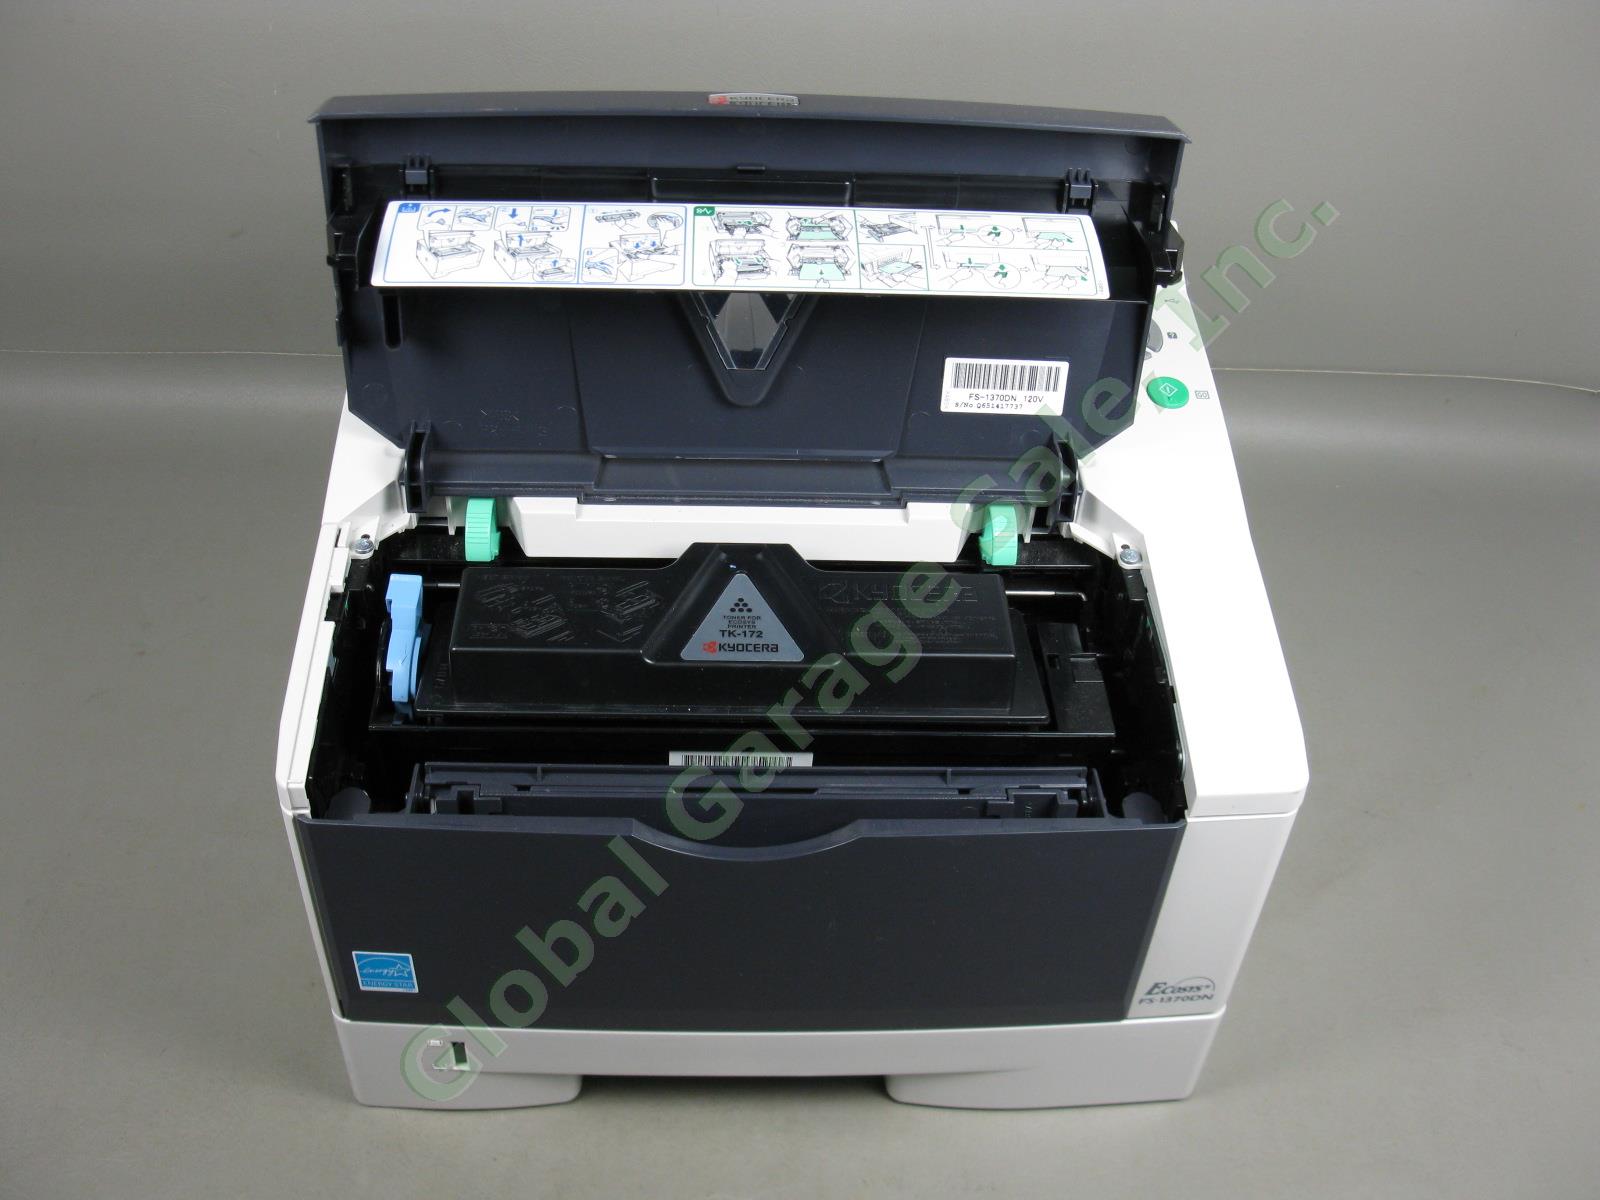 Kyocera Ecosys FS-1370DN Workgroup Network Laser Printer 40% Toner 6851 Pages 7